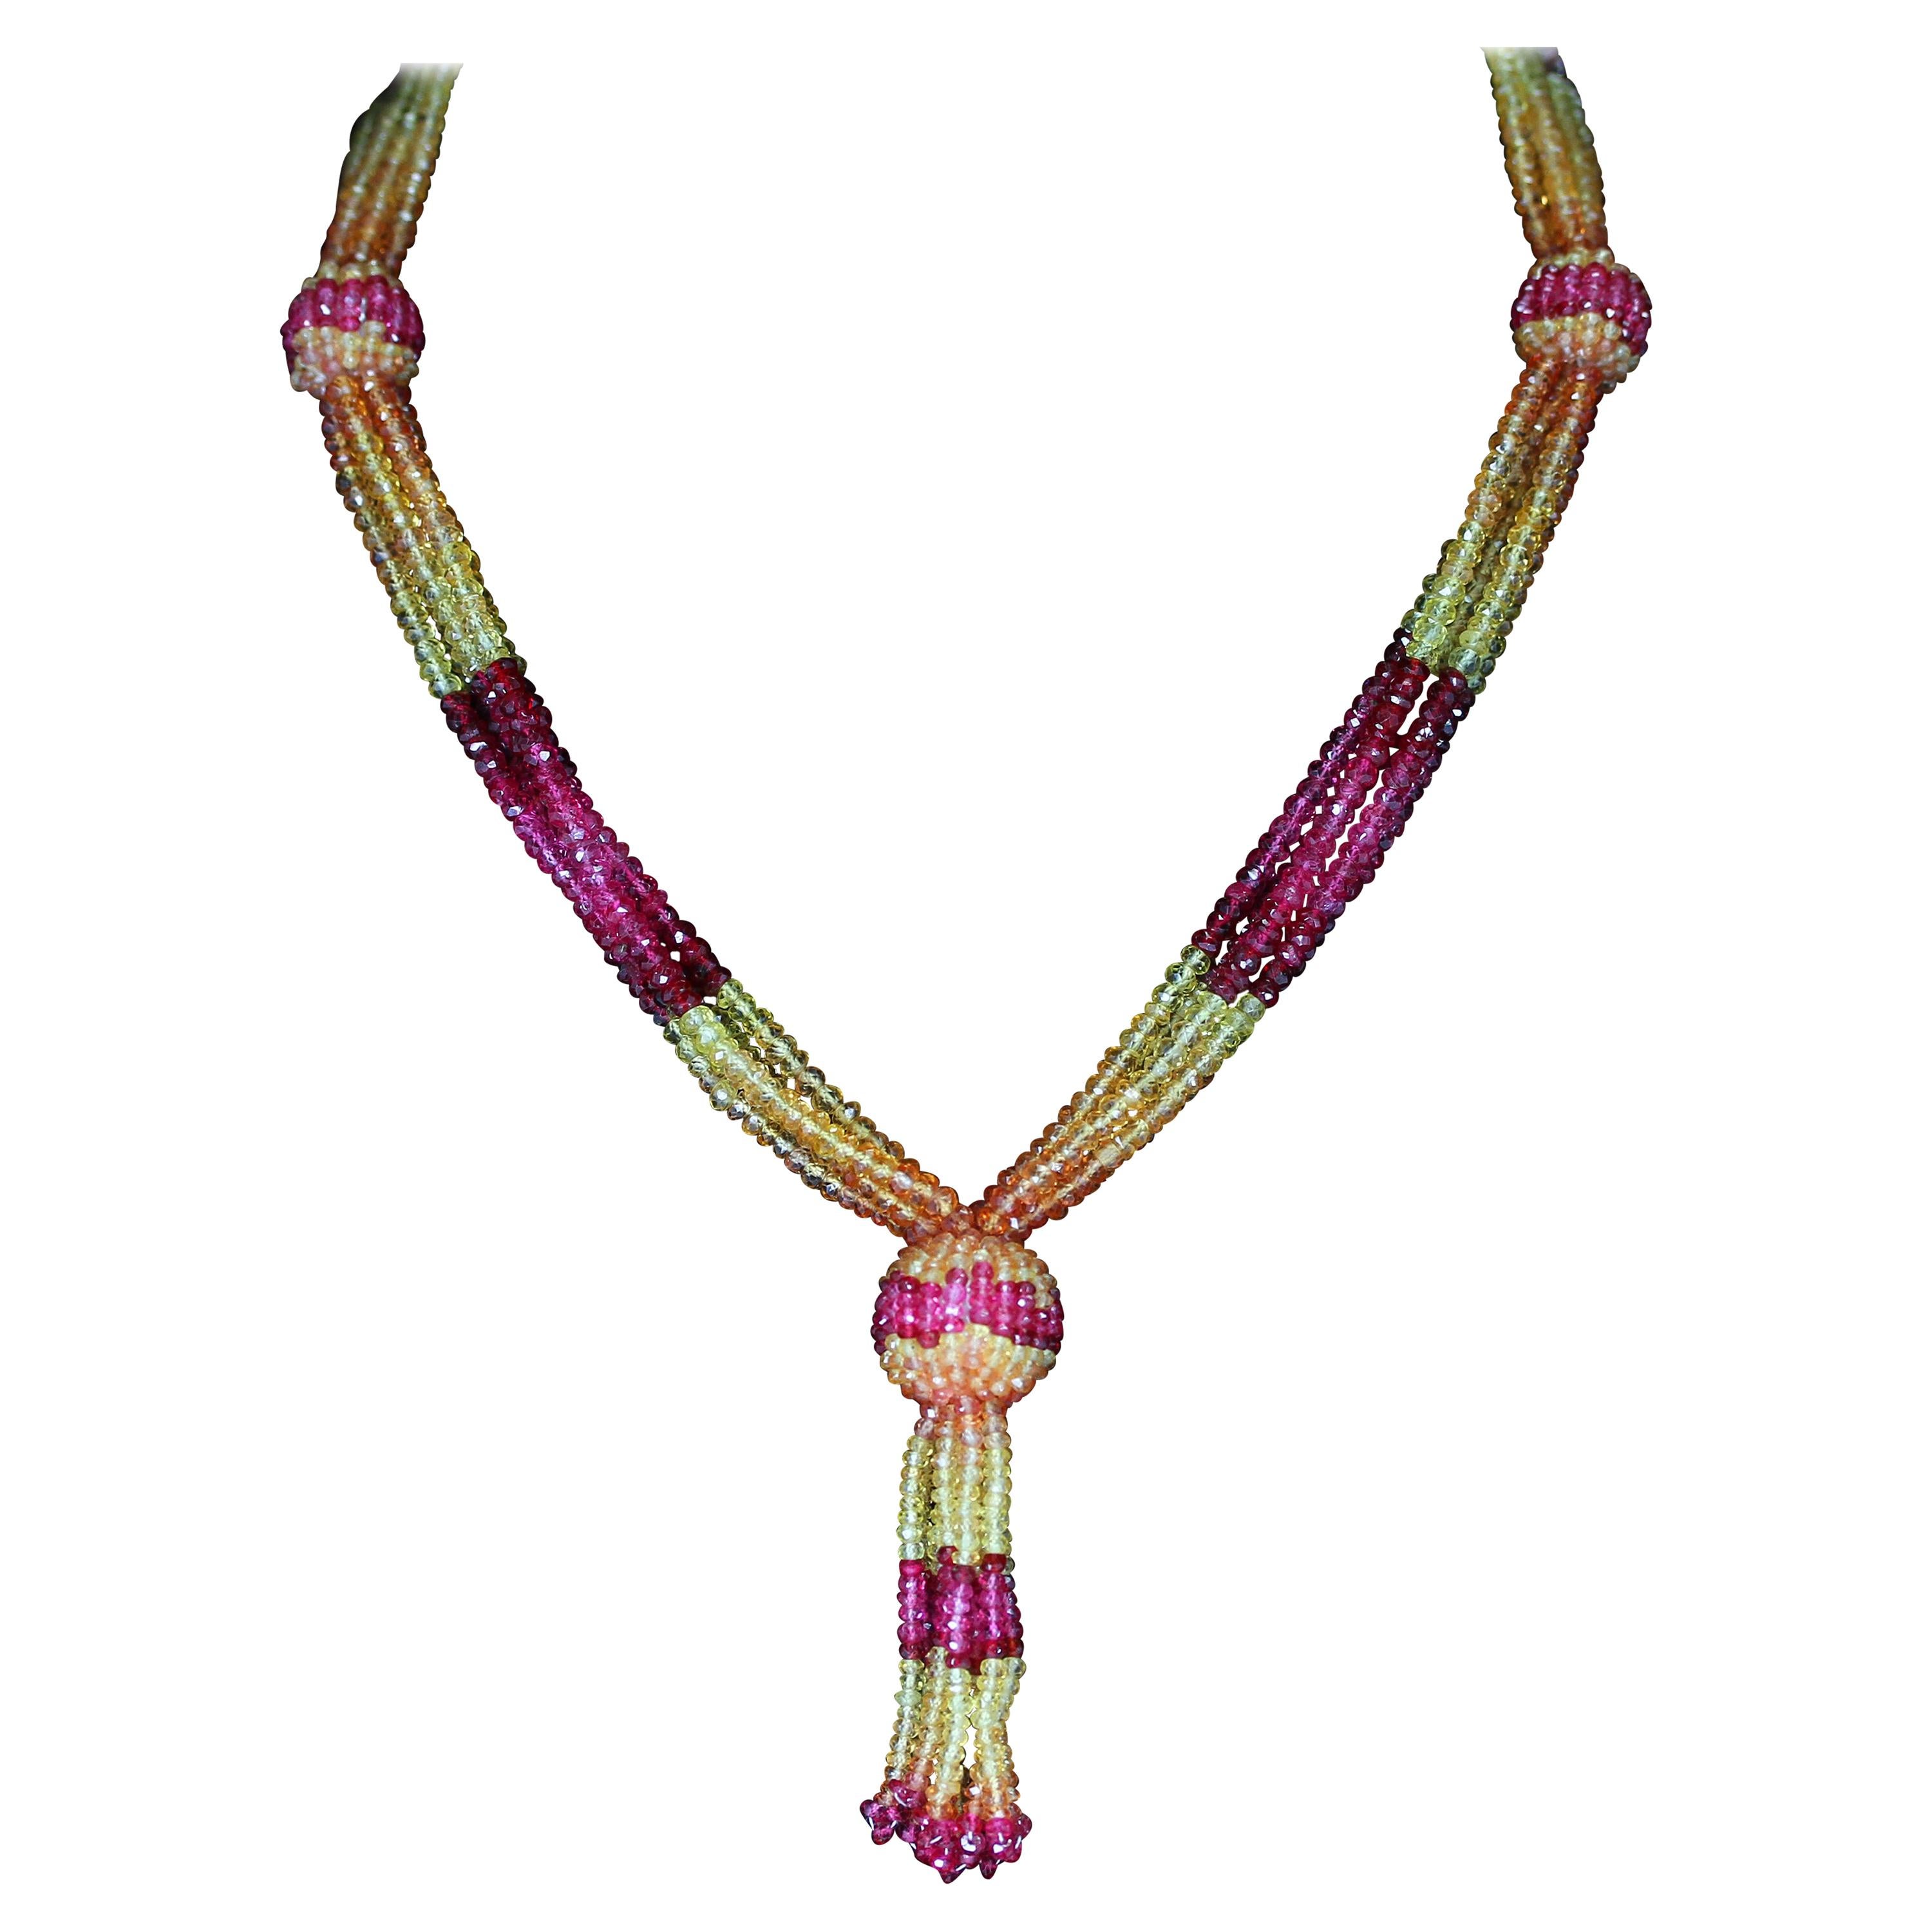 Yellow and Orange Sapphire with Spinel Beads, Tassel Necklace, 18K Diamond Clasp